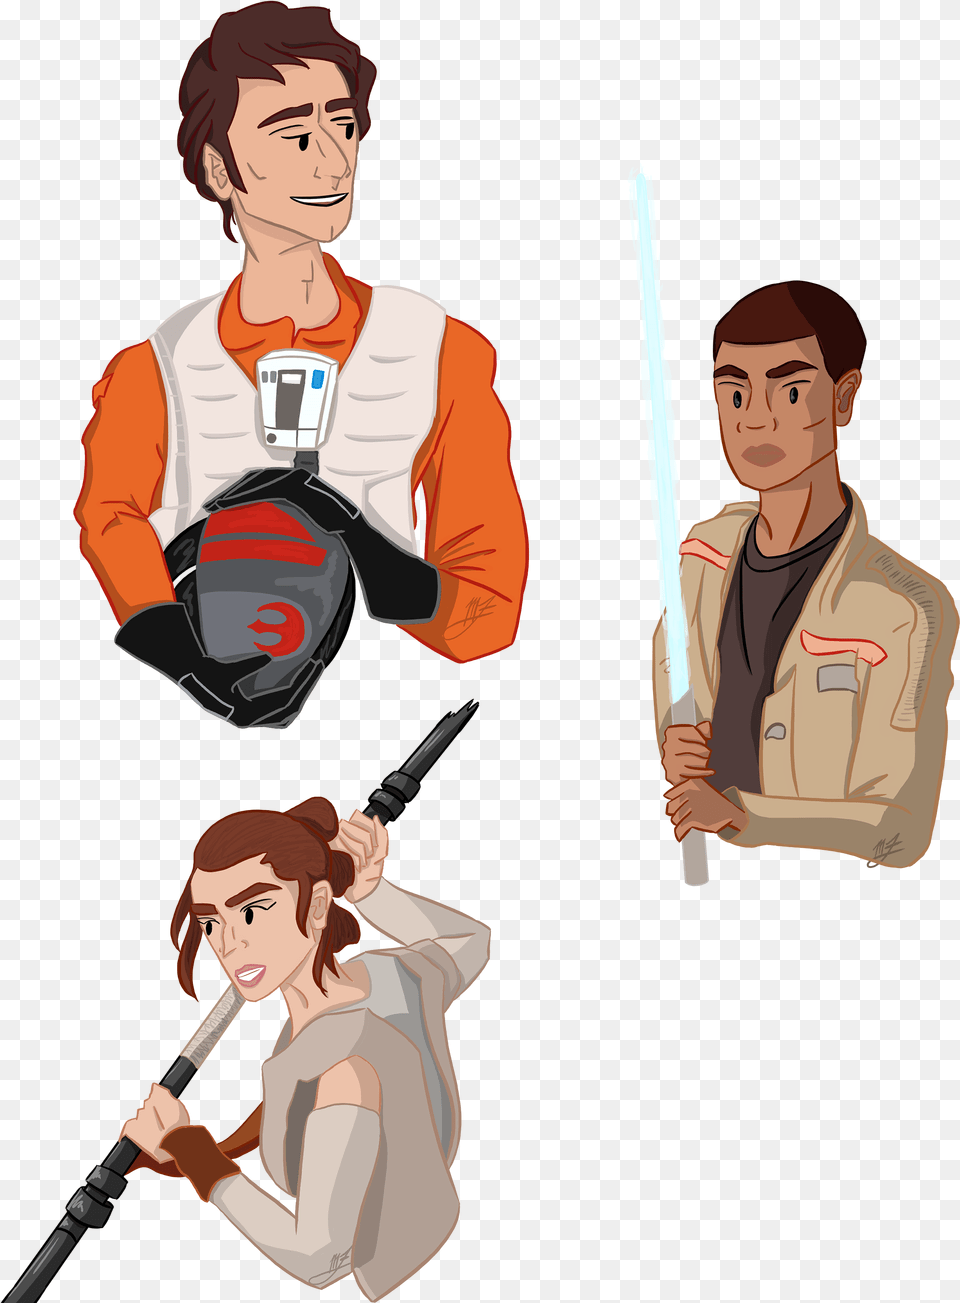 Busts Of Poe Finn And Rey From Star Wars Cartoon, Adult, Person, Man, Male Free Png Download